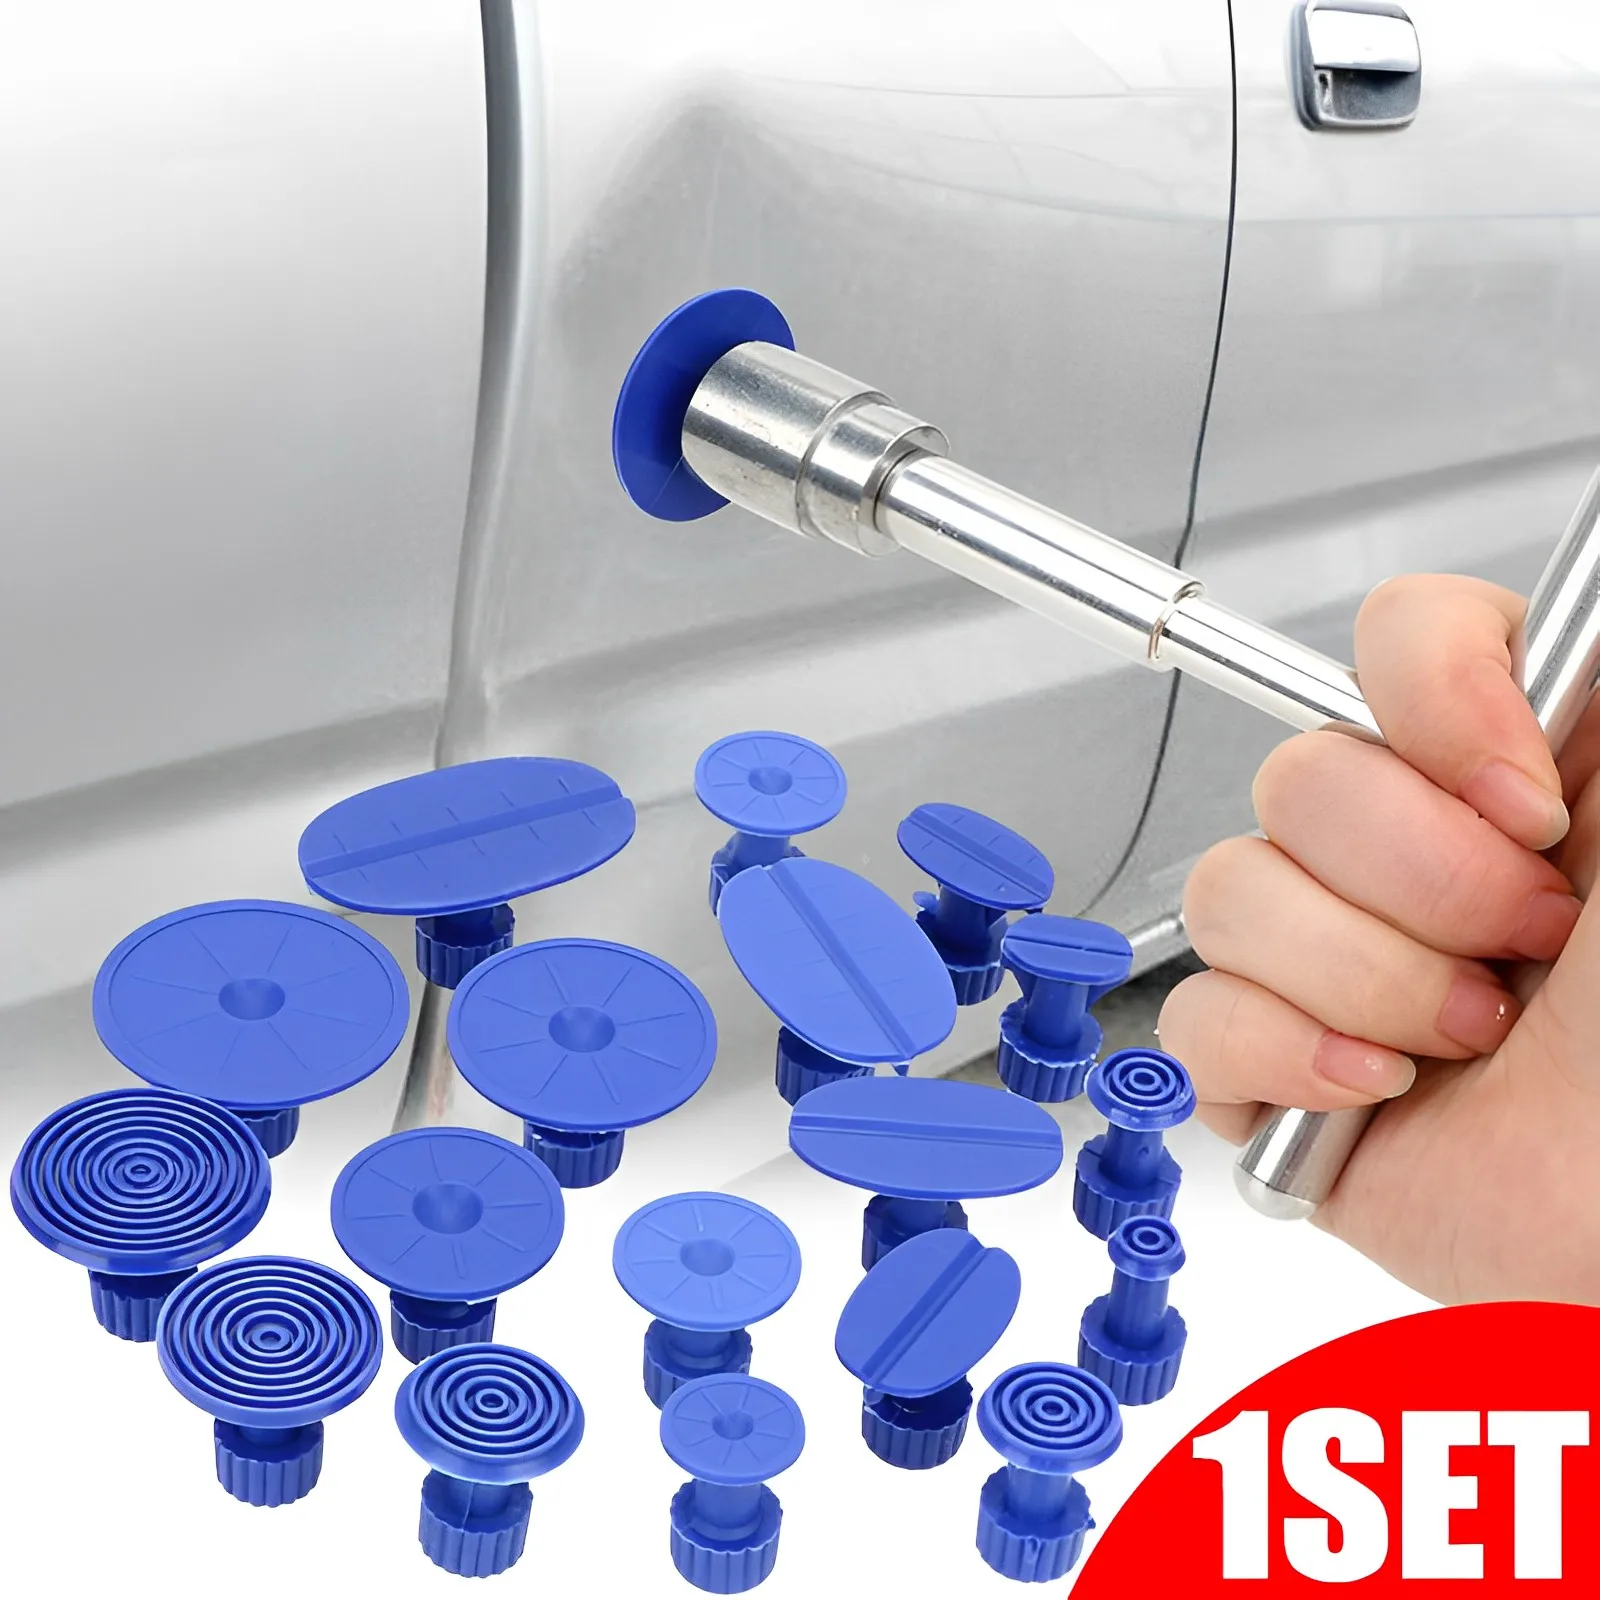 

Car Body Dent Puller Suction Cup Kit Paintless Dents Remover Hand Repair Tools Universal Auto Body Dent Removing Kits